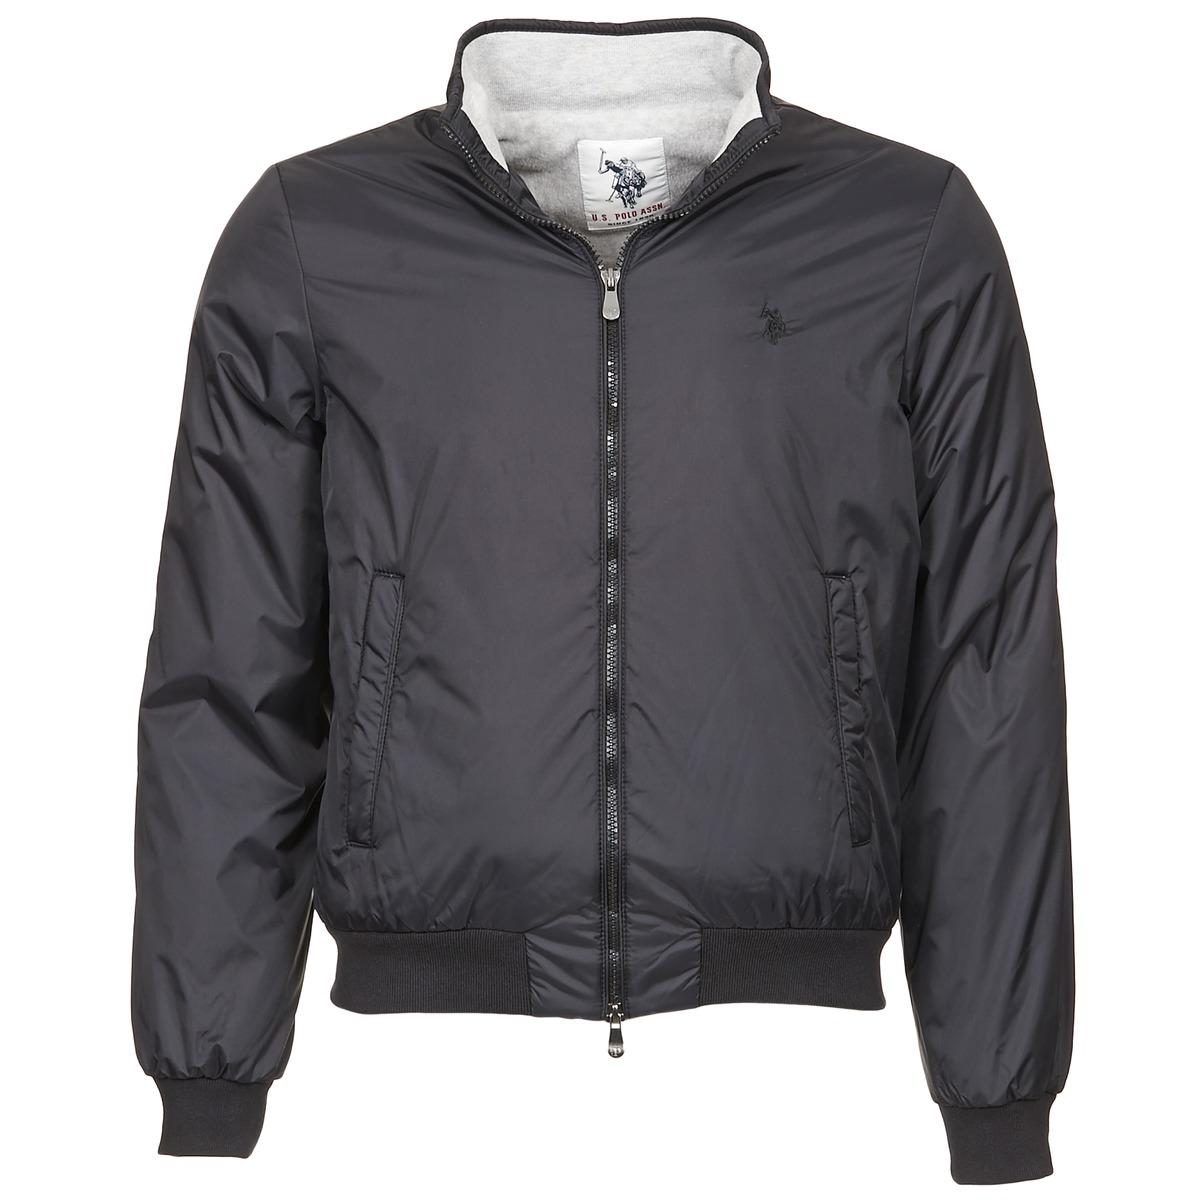 U.S. POLO ASSN. Uspa Jacket in Black for Men - Save 29% - Lyst